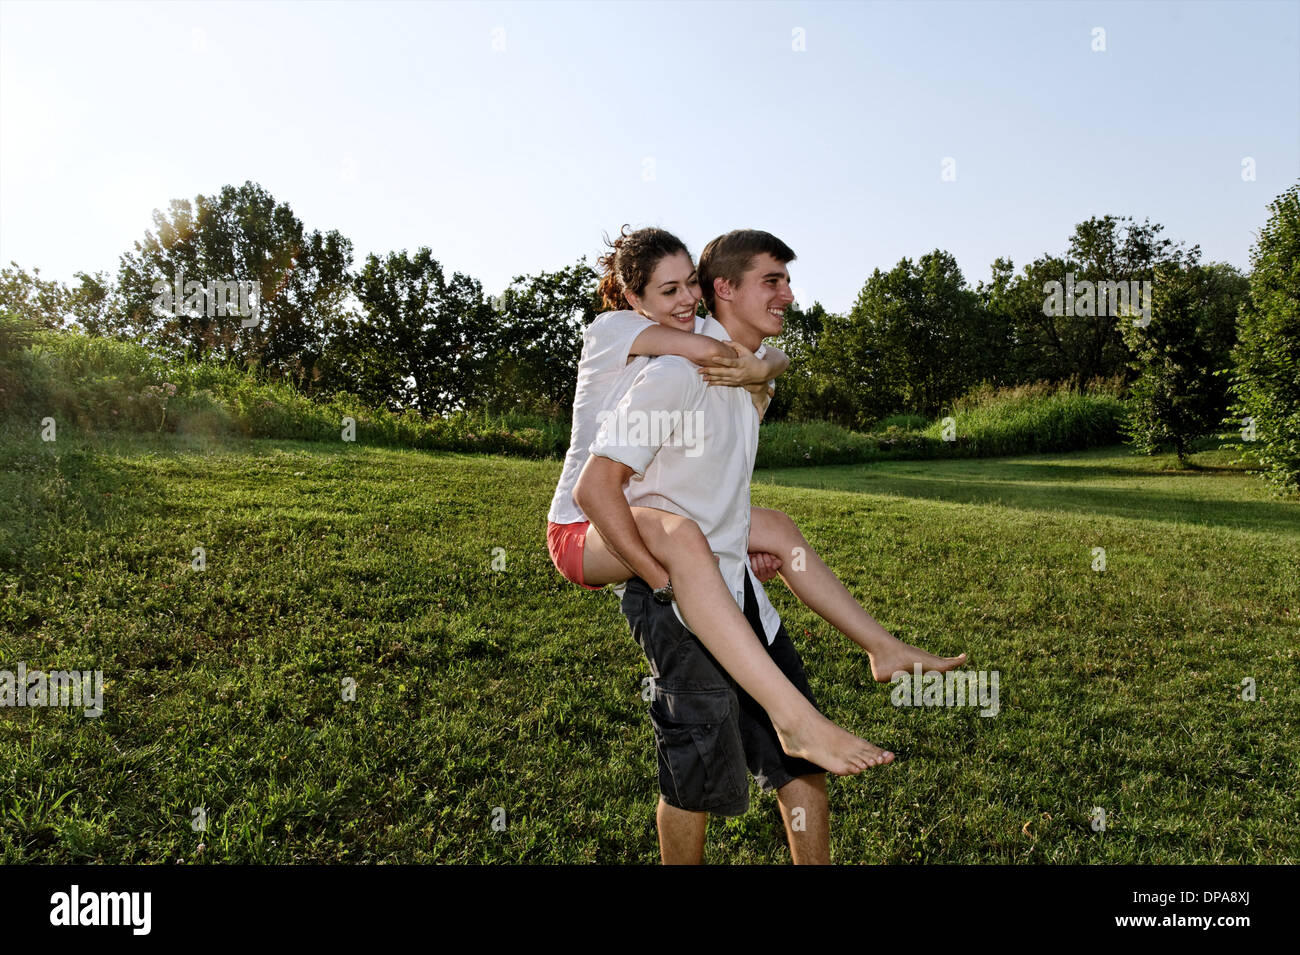 Young man giving piggyback ride to young woman Stock Photo